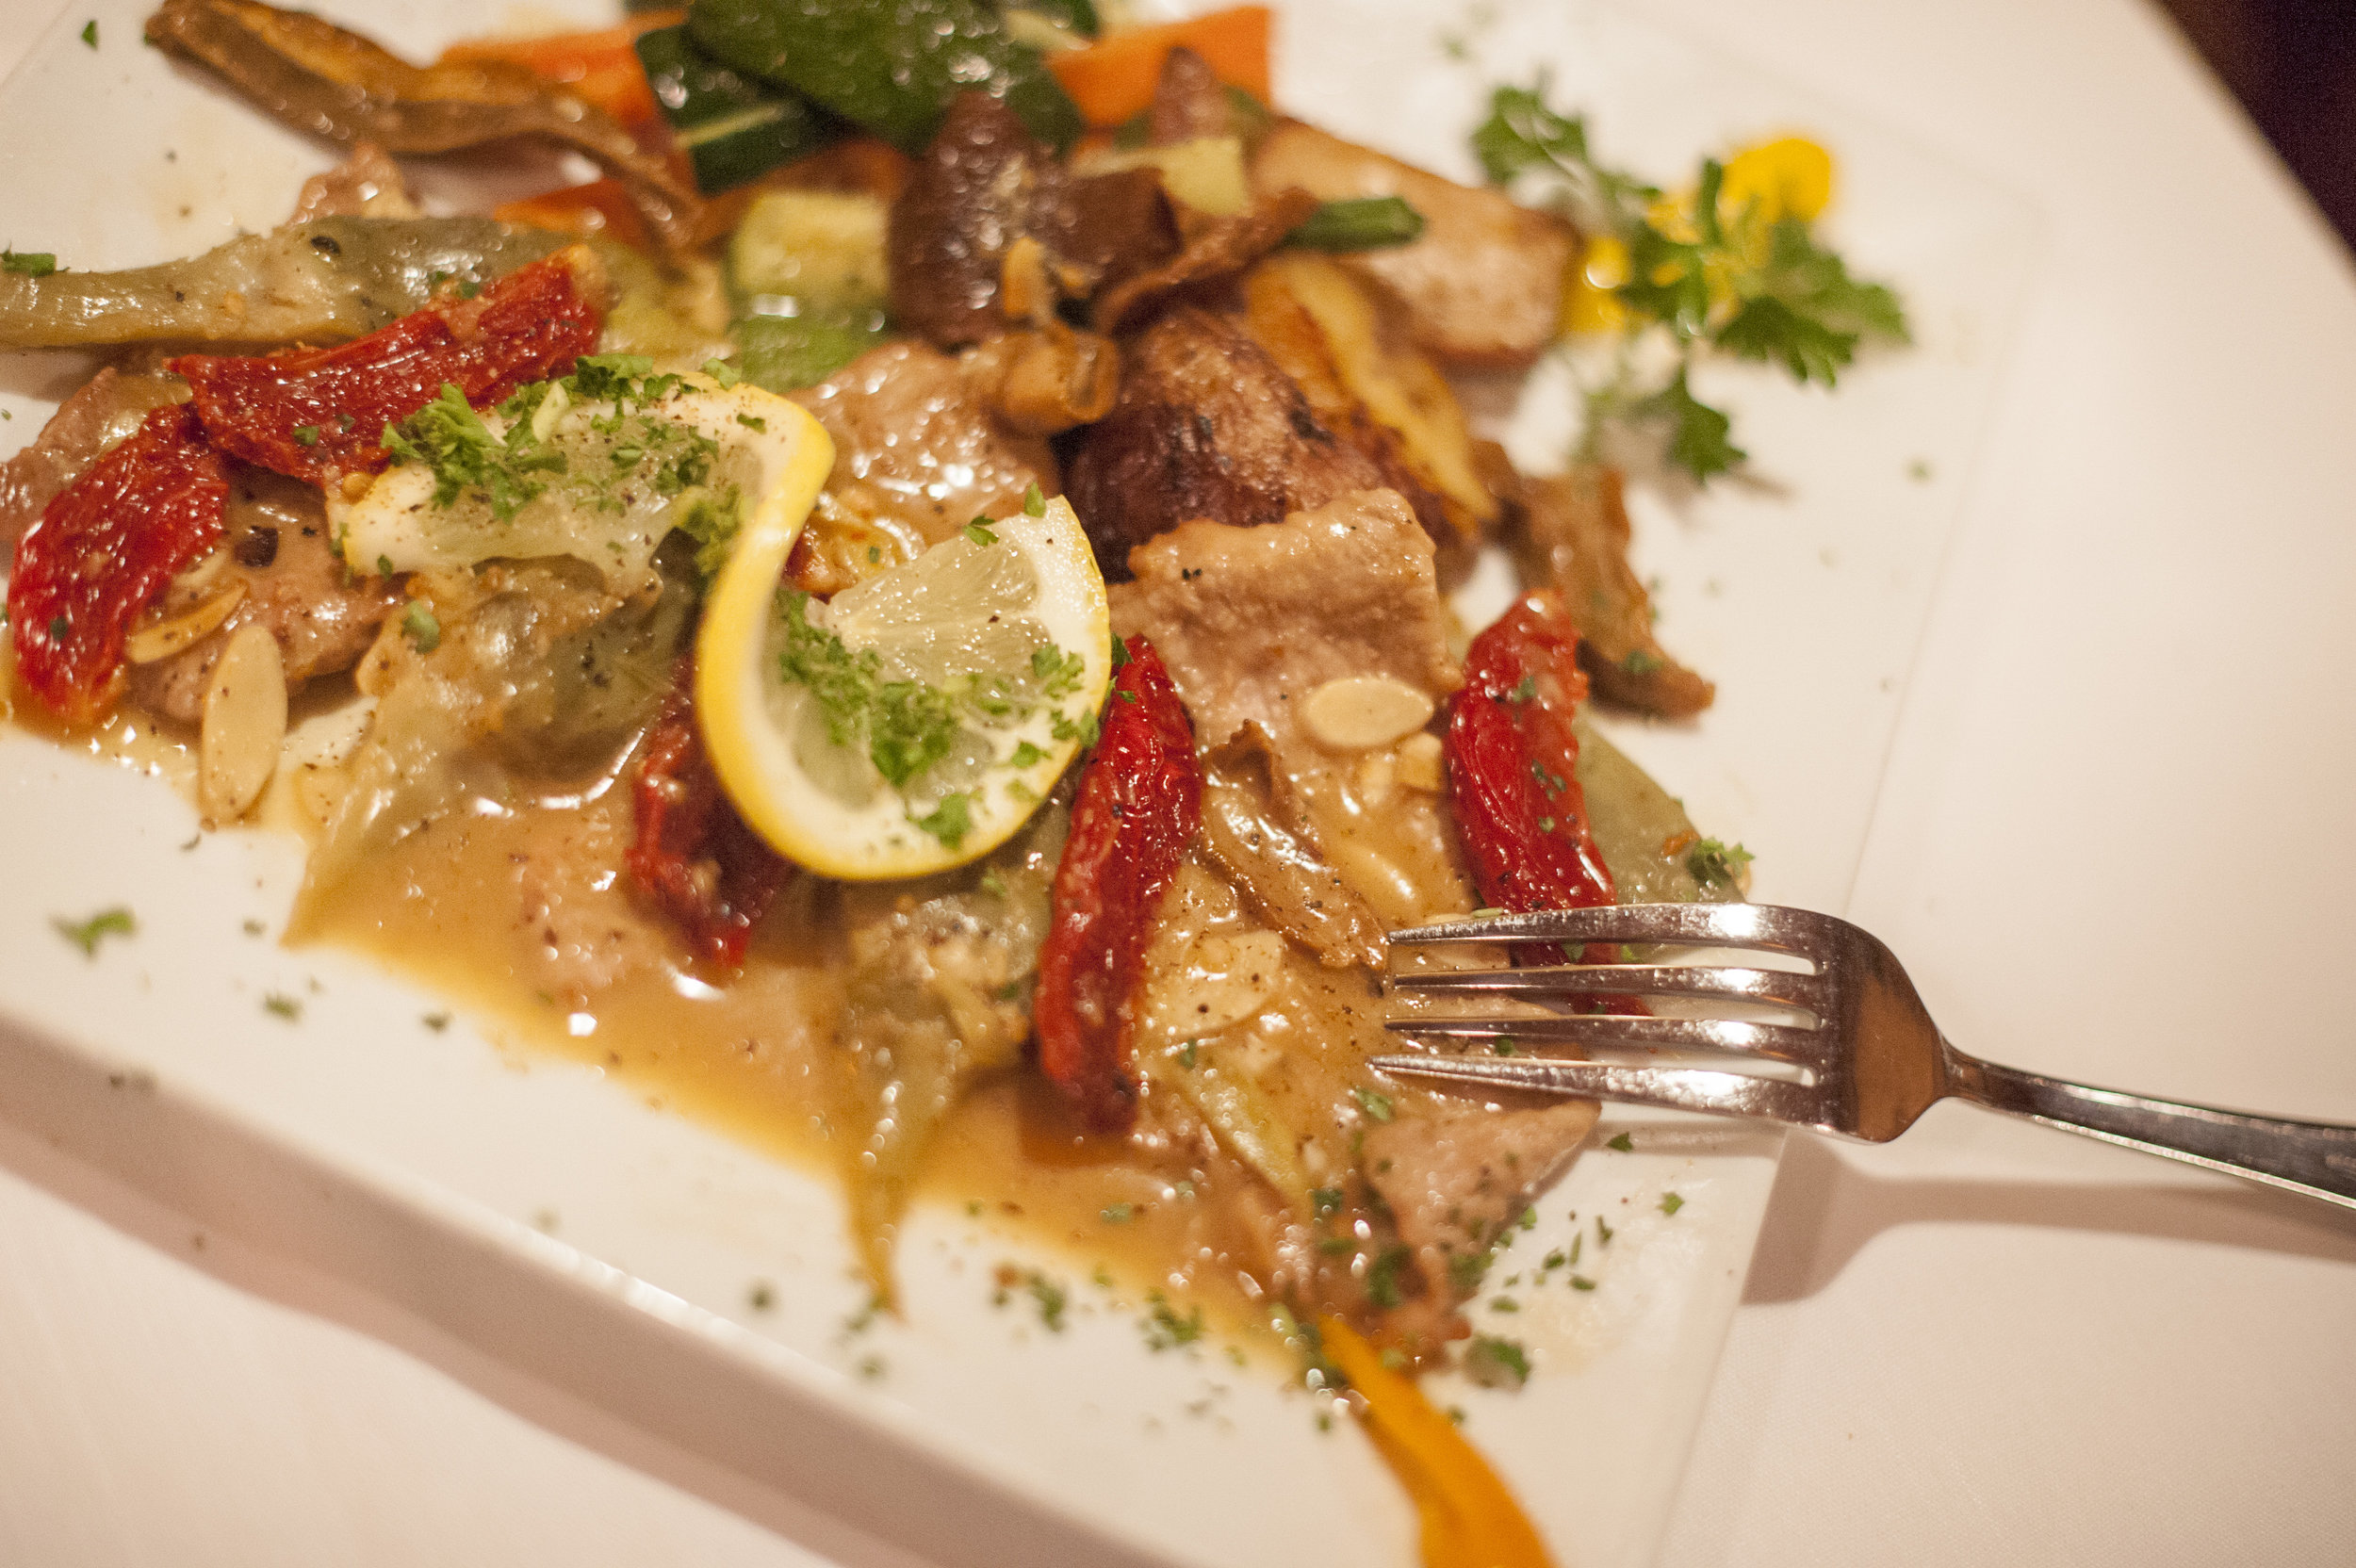   The veal carciofi from Milito’s.&nbsp;  Long Islander News Photo/File  